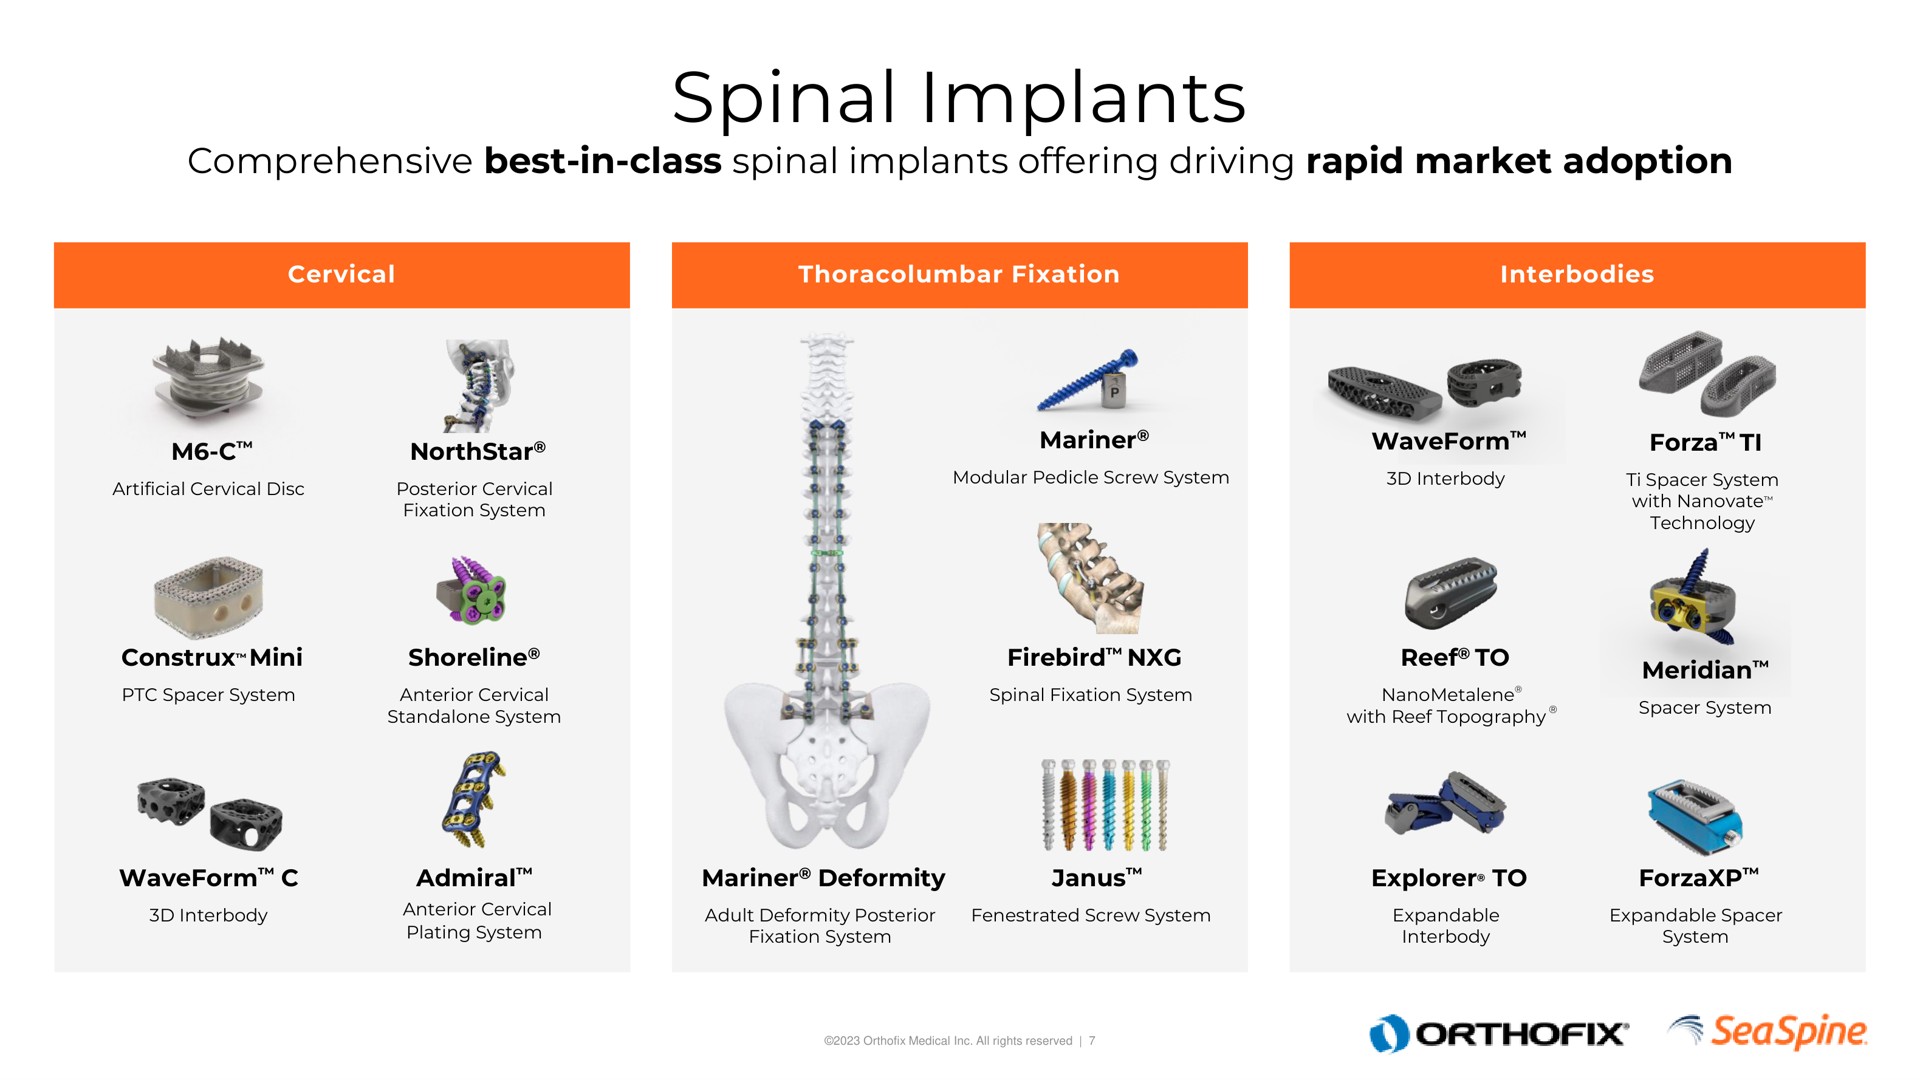 spinal implants comprehensive best in class offering driving rapid market adoption a by a | Orthofix